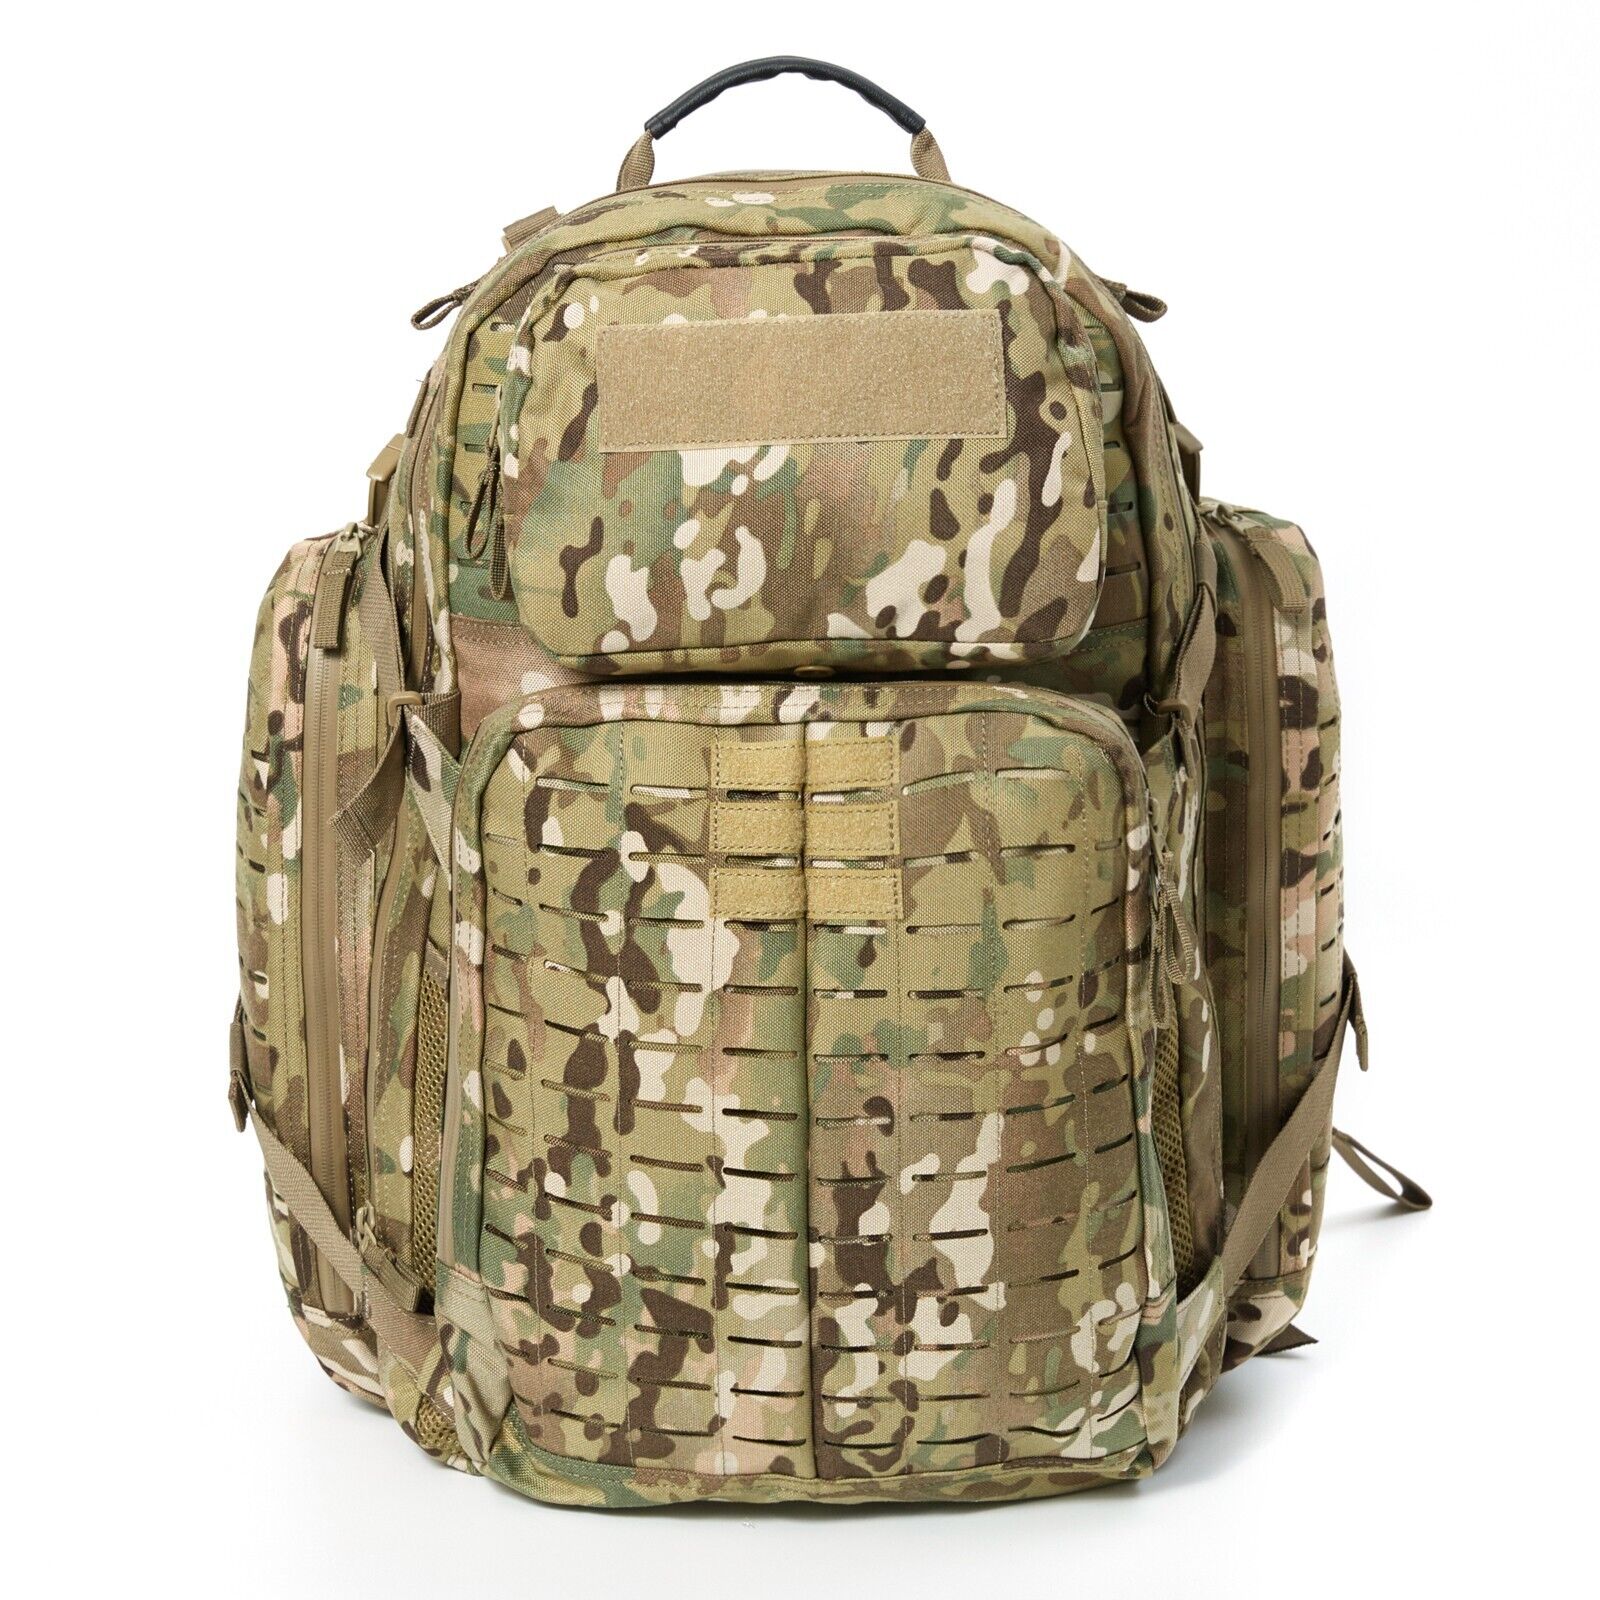 MT Military 3Day Rucksack with External Frame 2.0 MOLLE Medium Ruck - Multicam